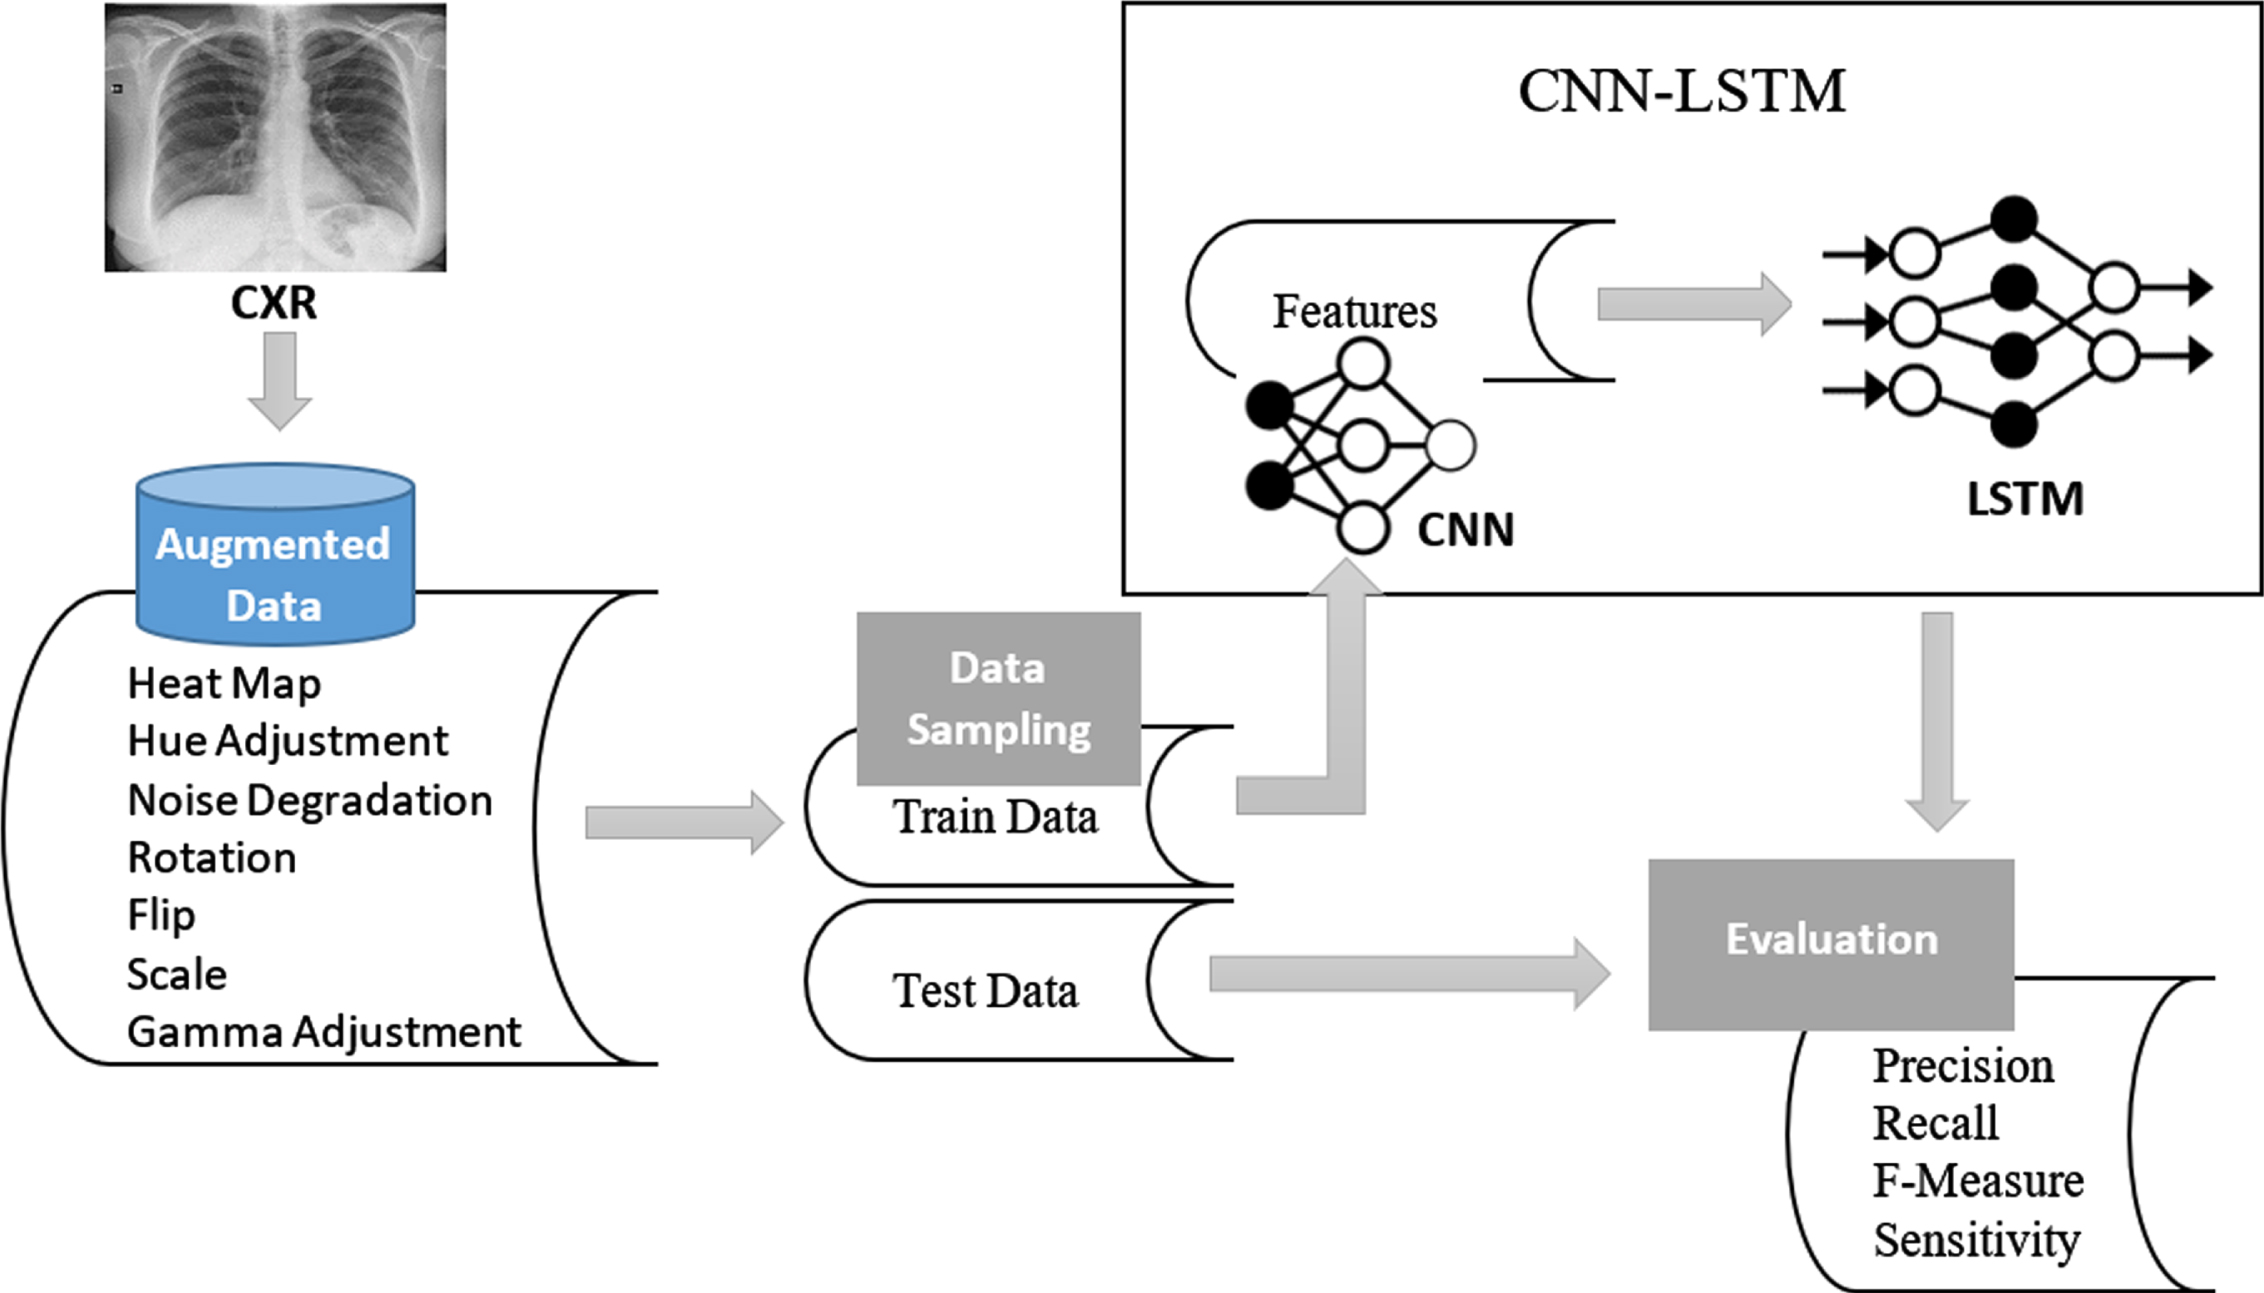 Data model of the proposed CNN-LSTM